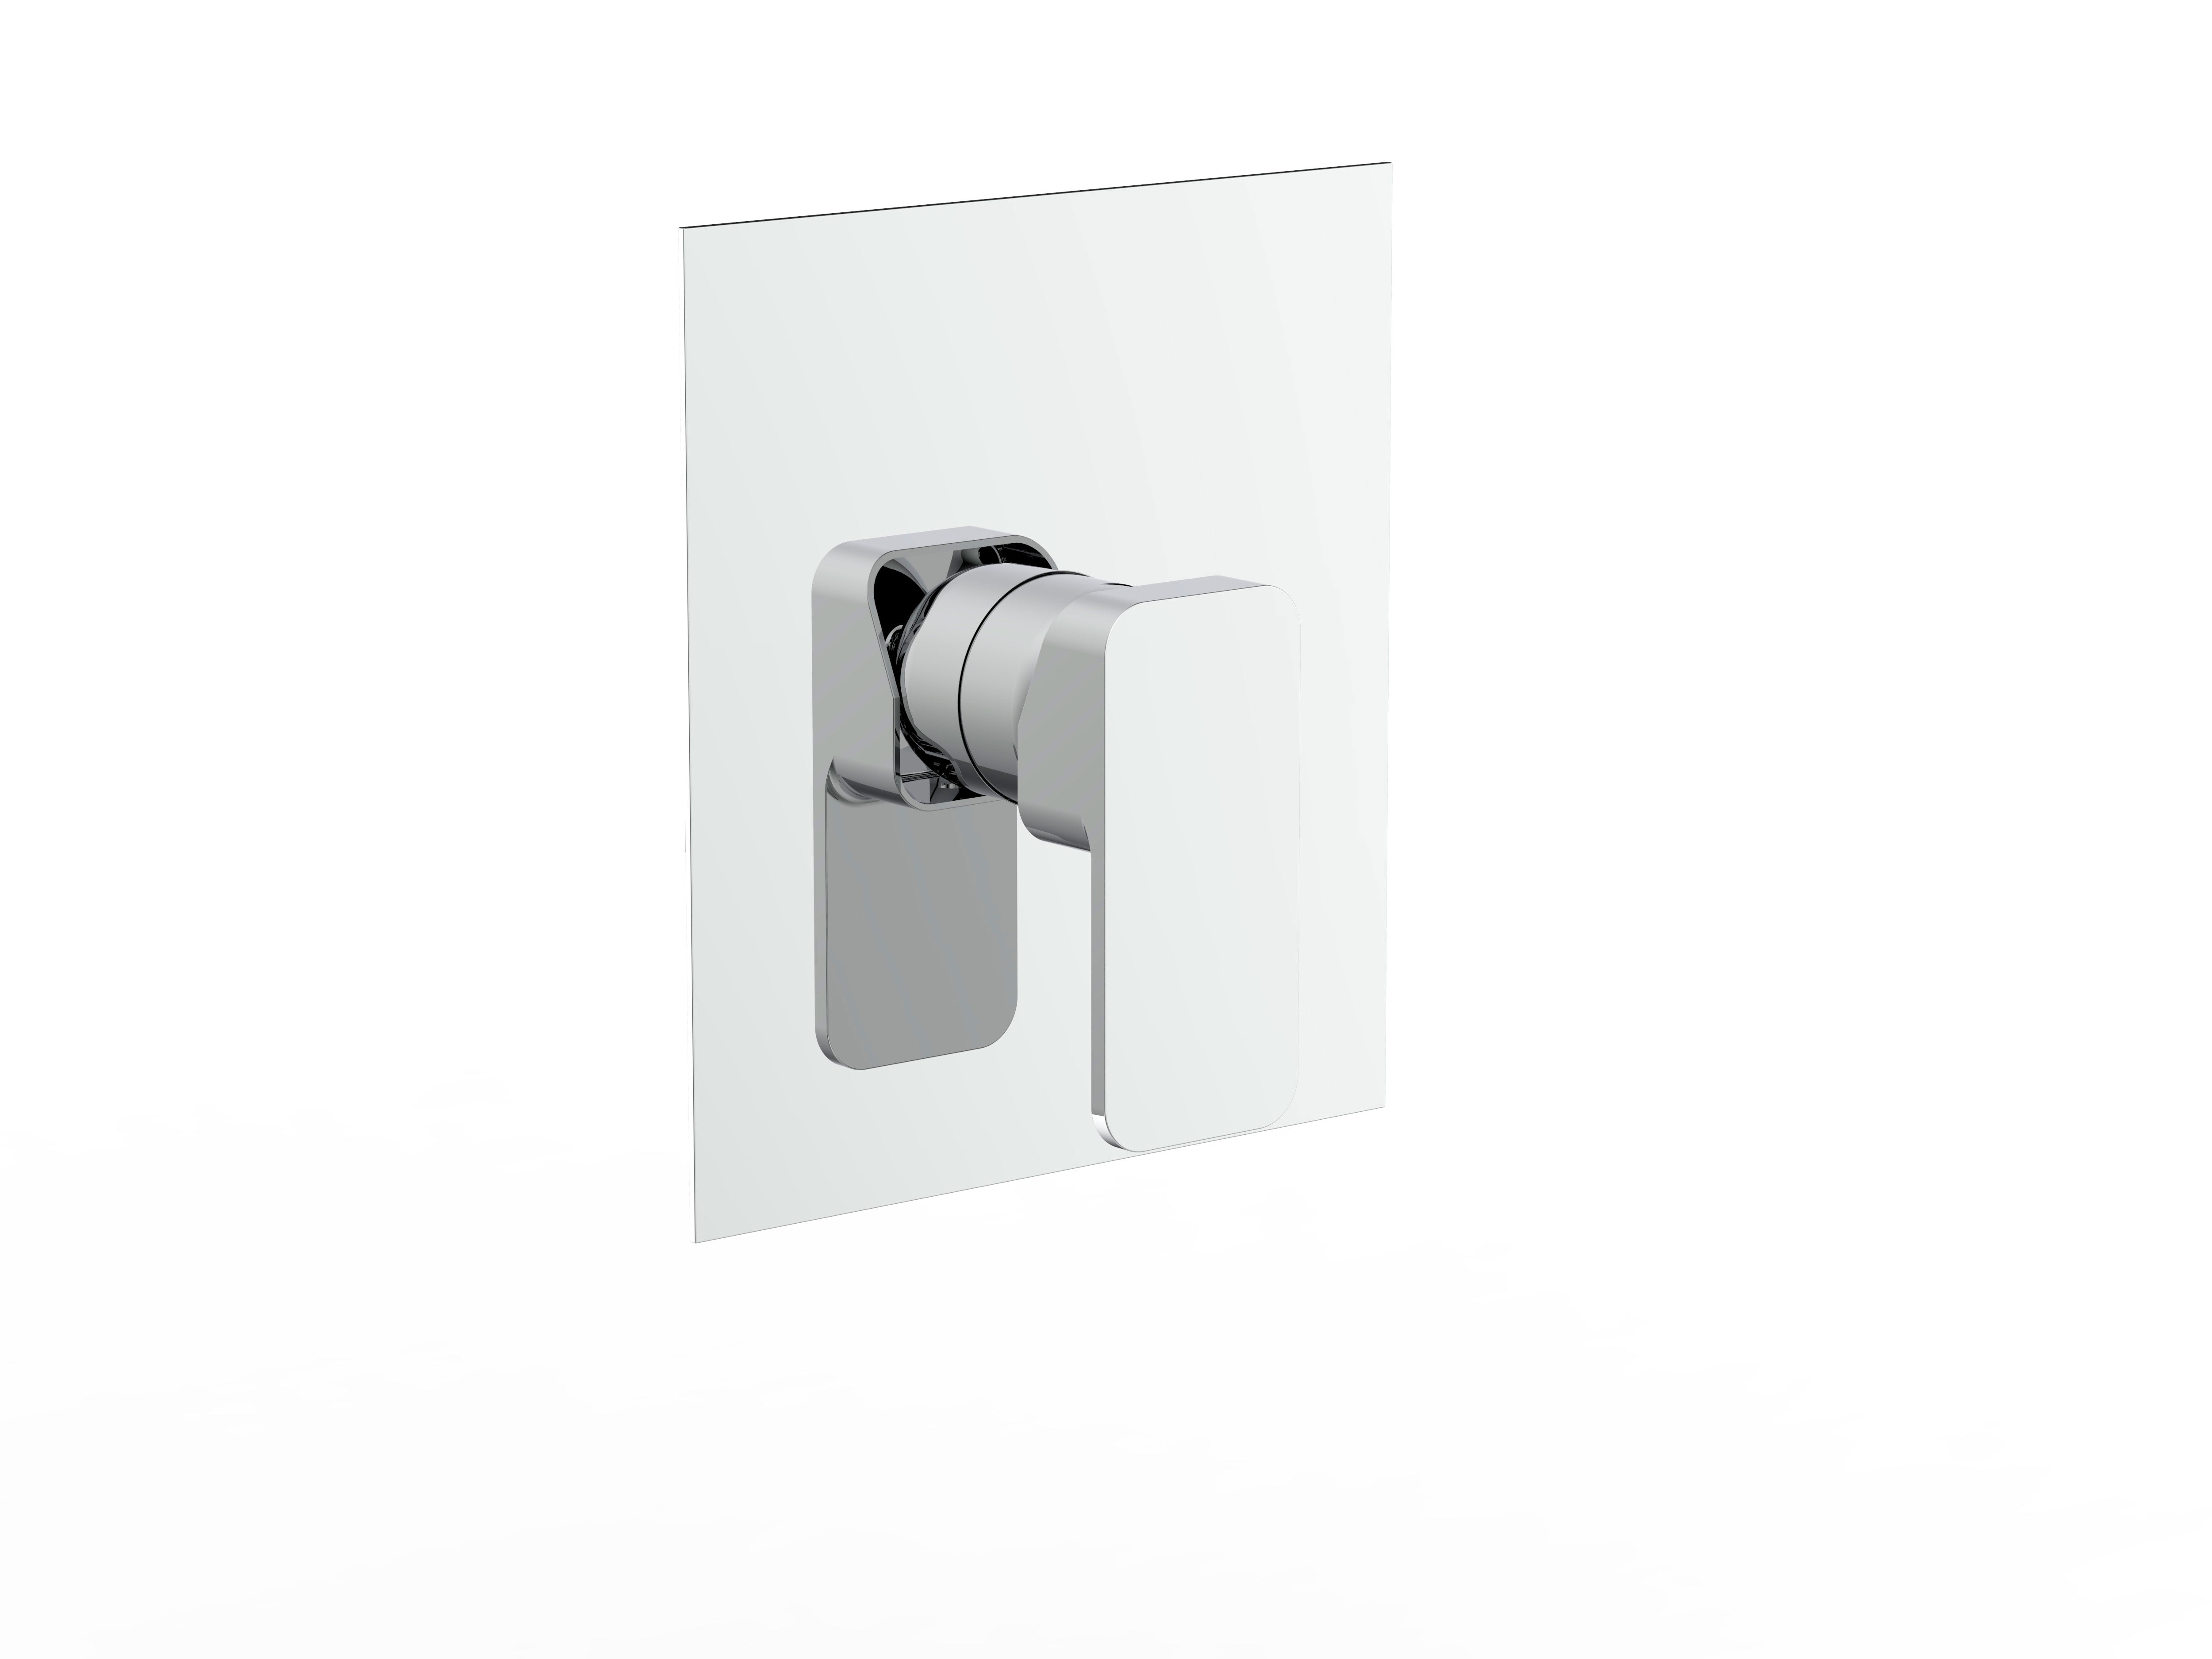 DAX Square Shower Valve 1 Function (DAX-6573A)